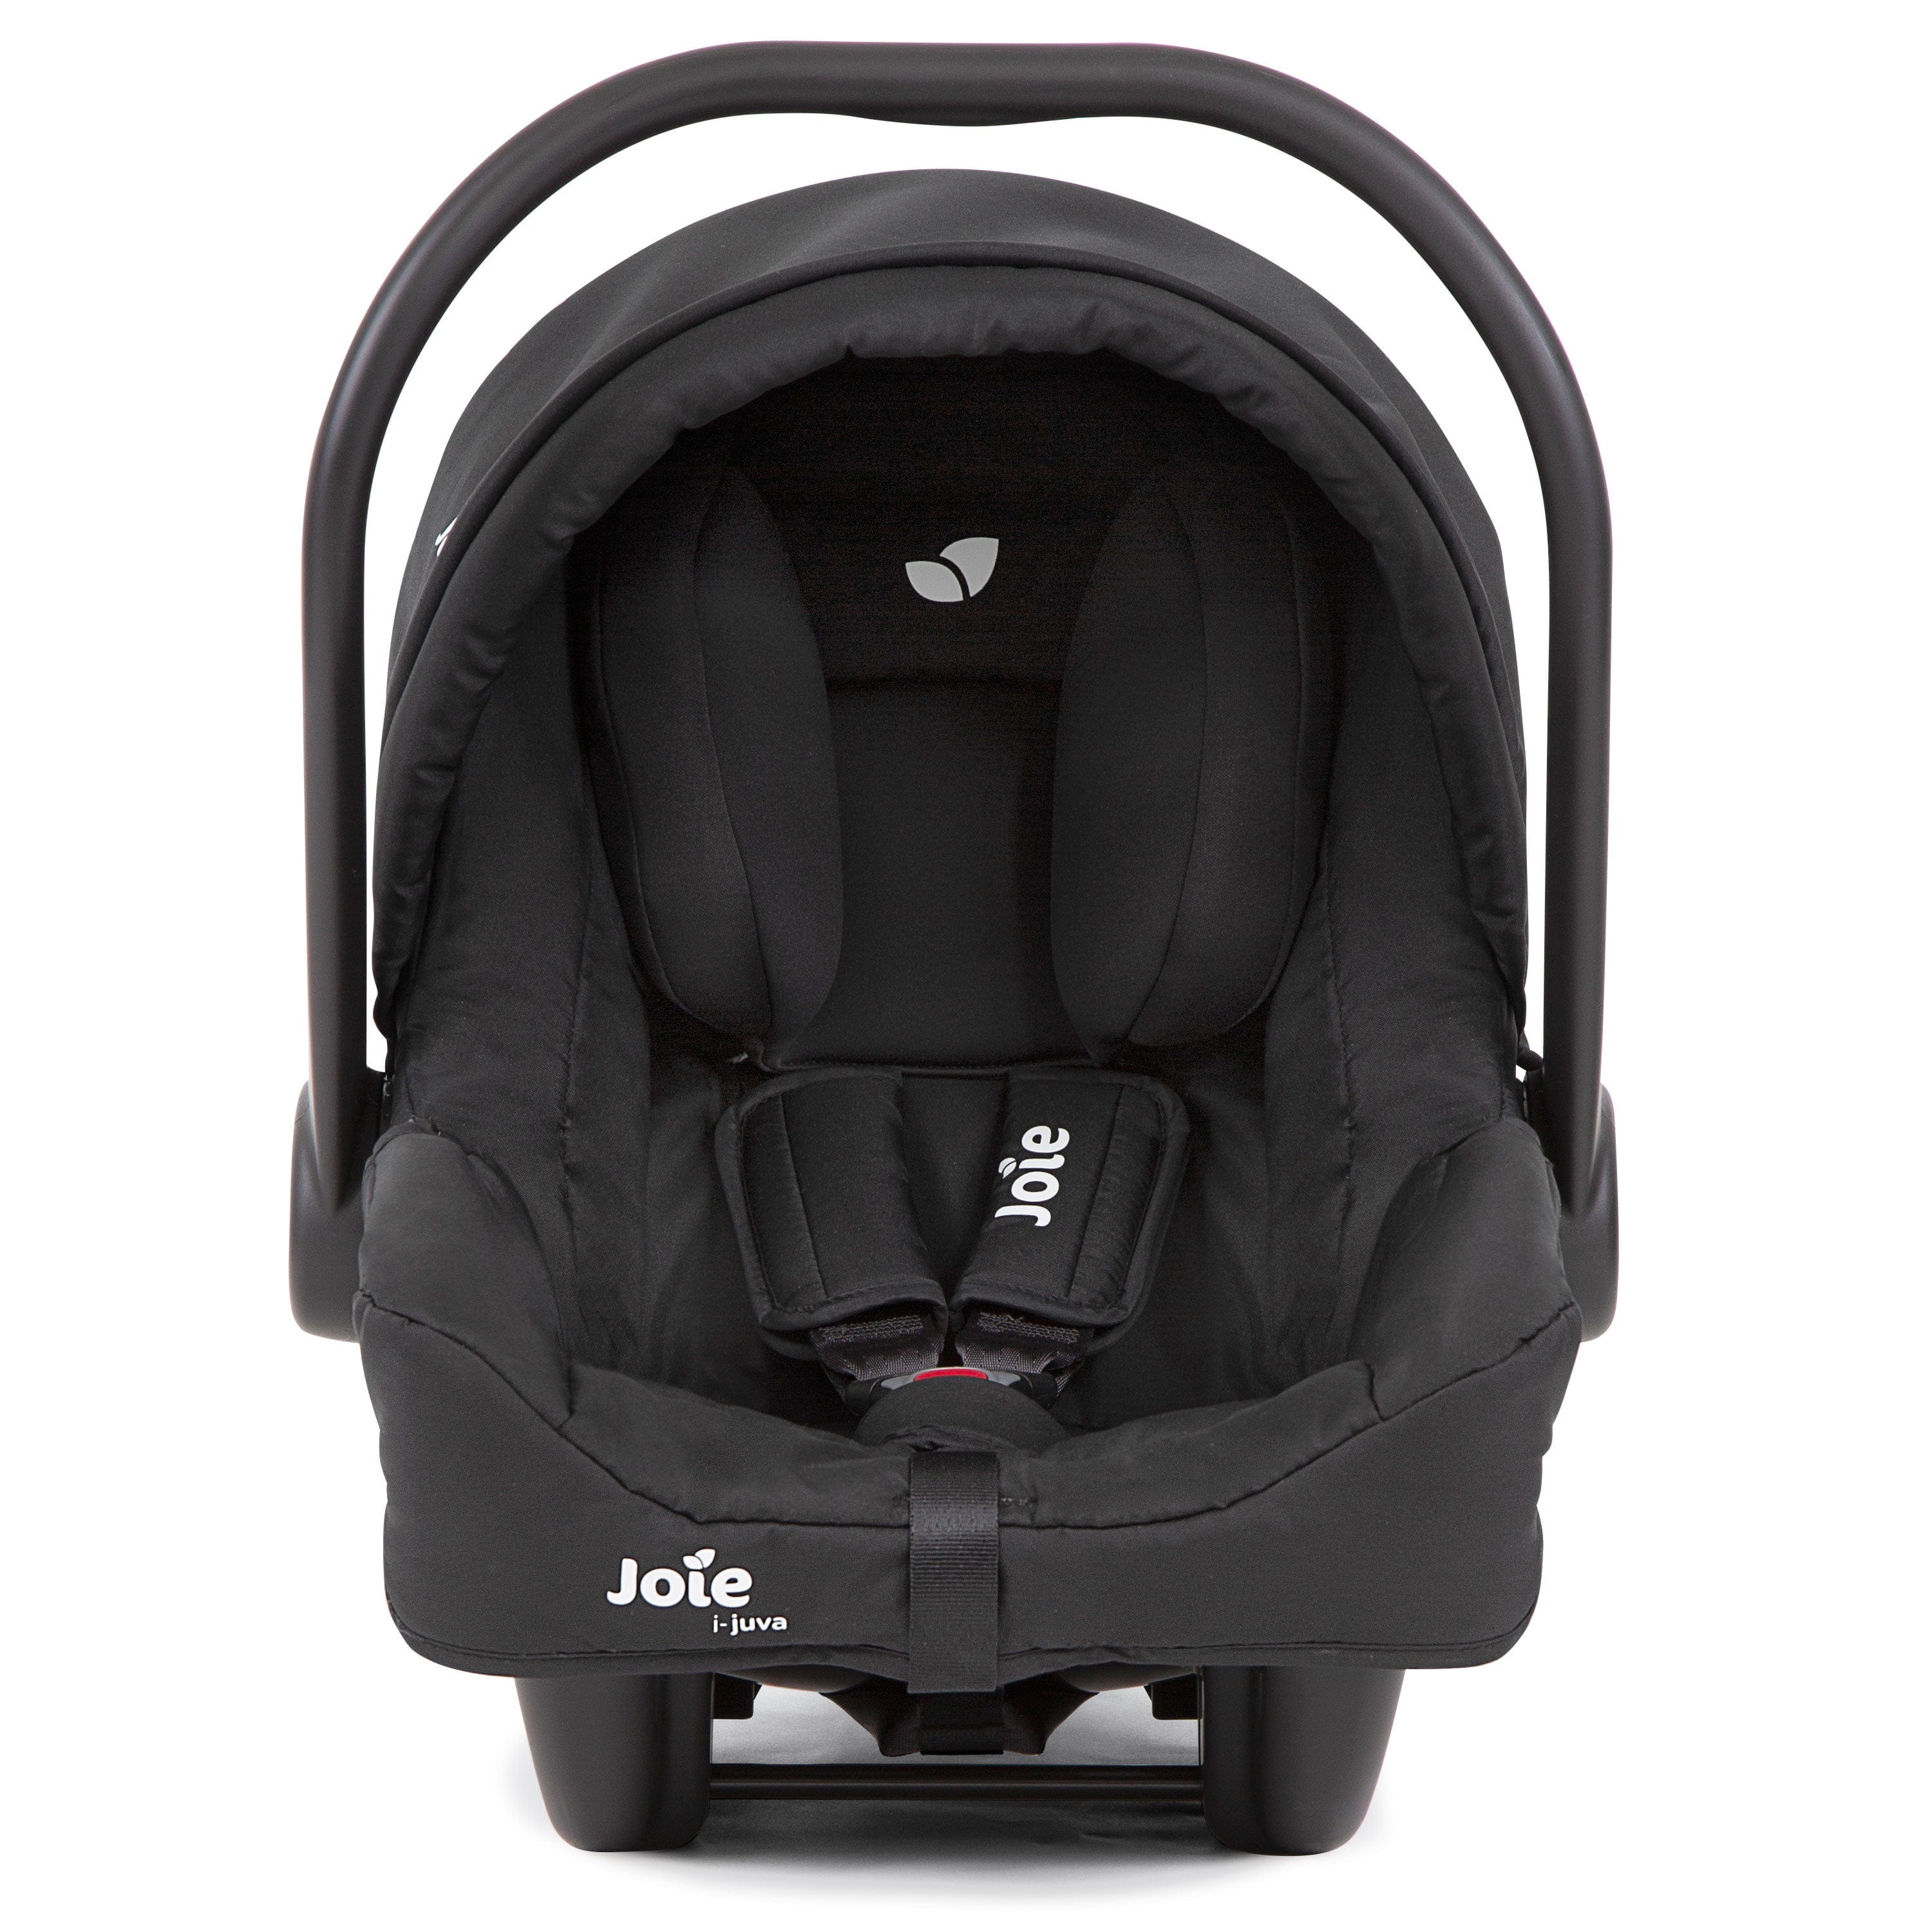 Joie baby carriers Joie i-Juva R129 i-Size Infant Carrier - Shale C2114AASHA000